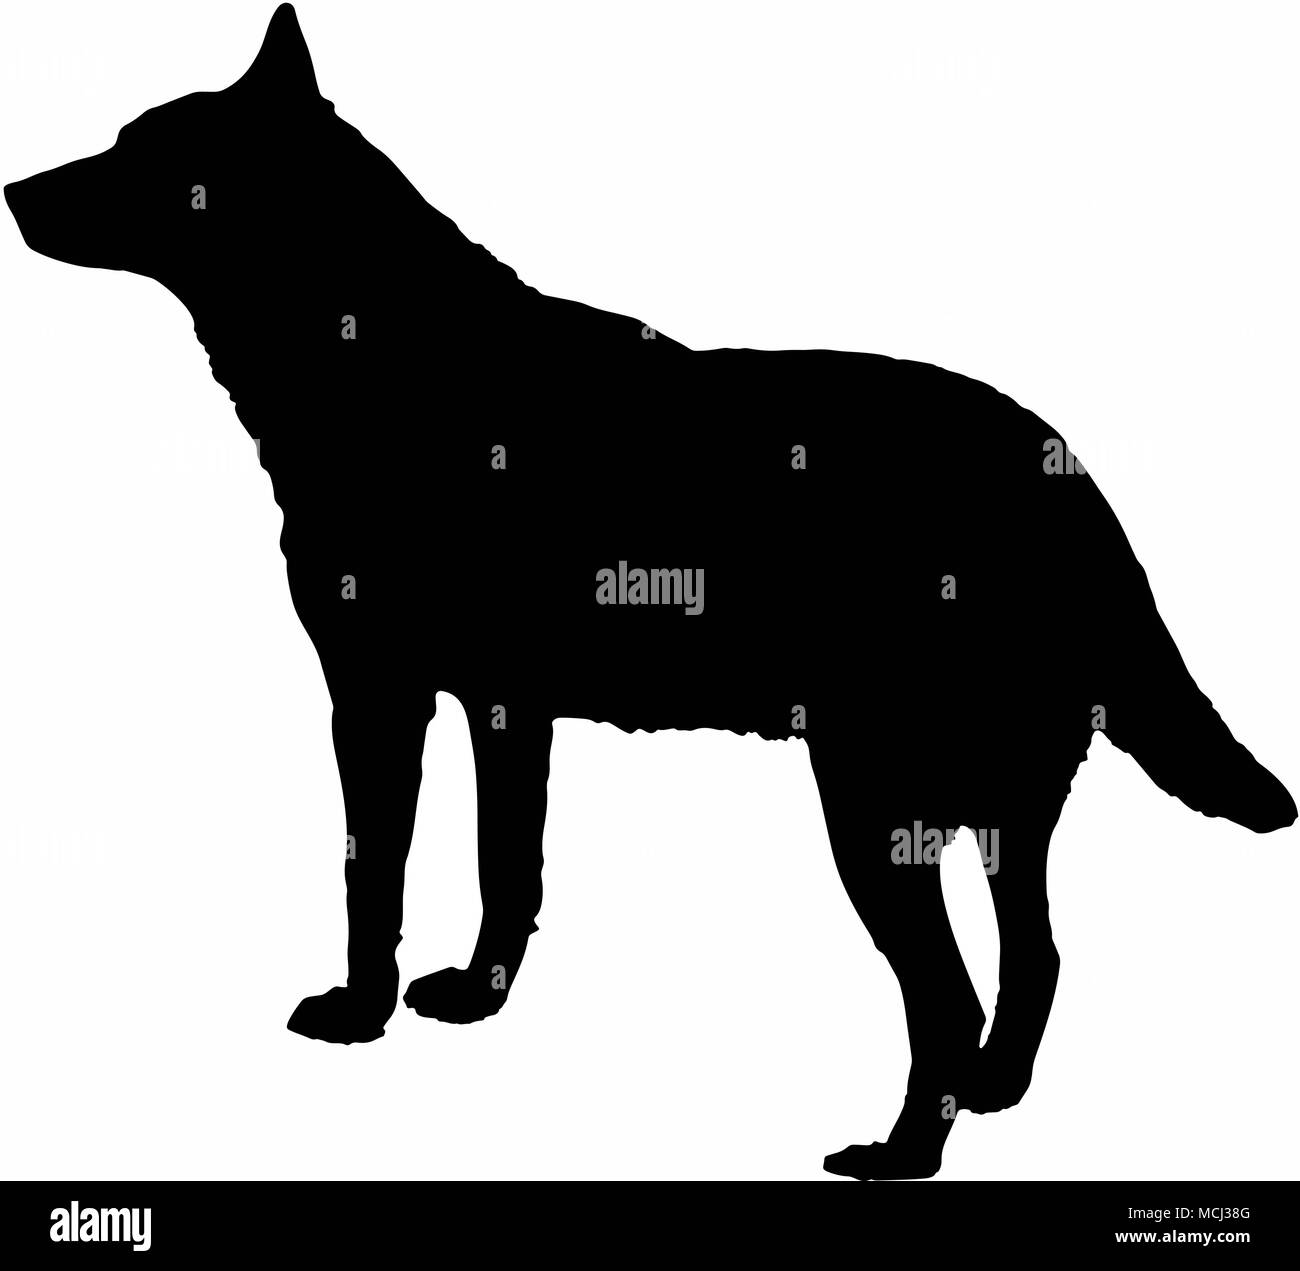 dog wolf black silhouette isolate on white background vector illustration. Stock Vector